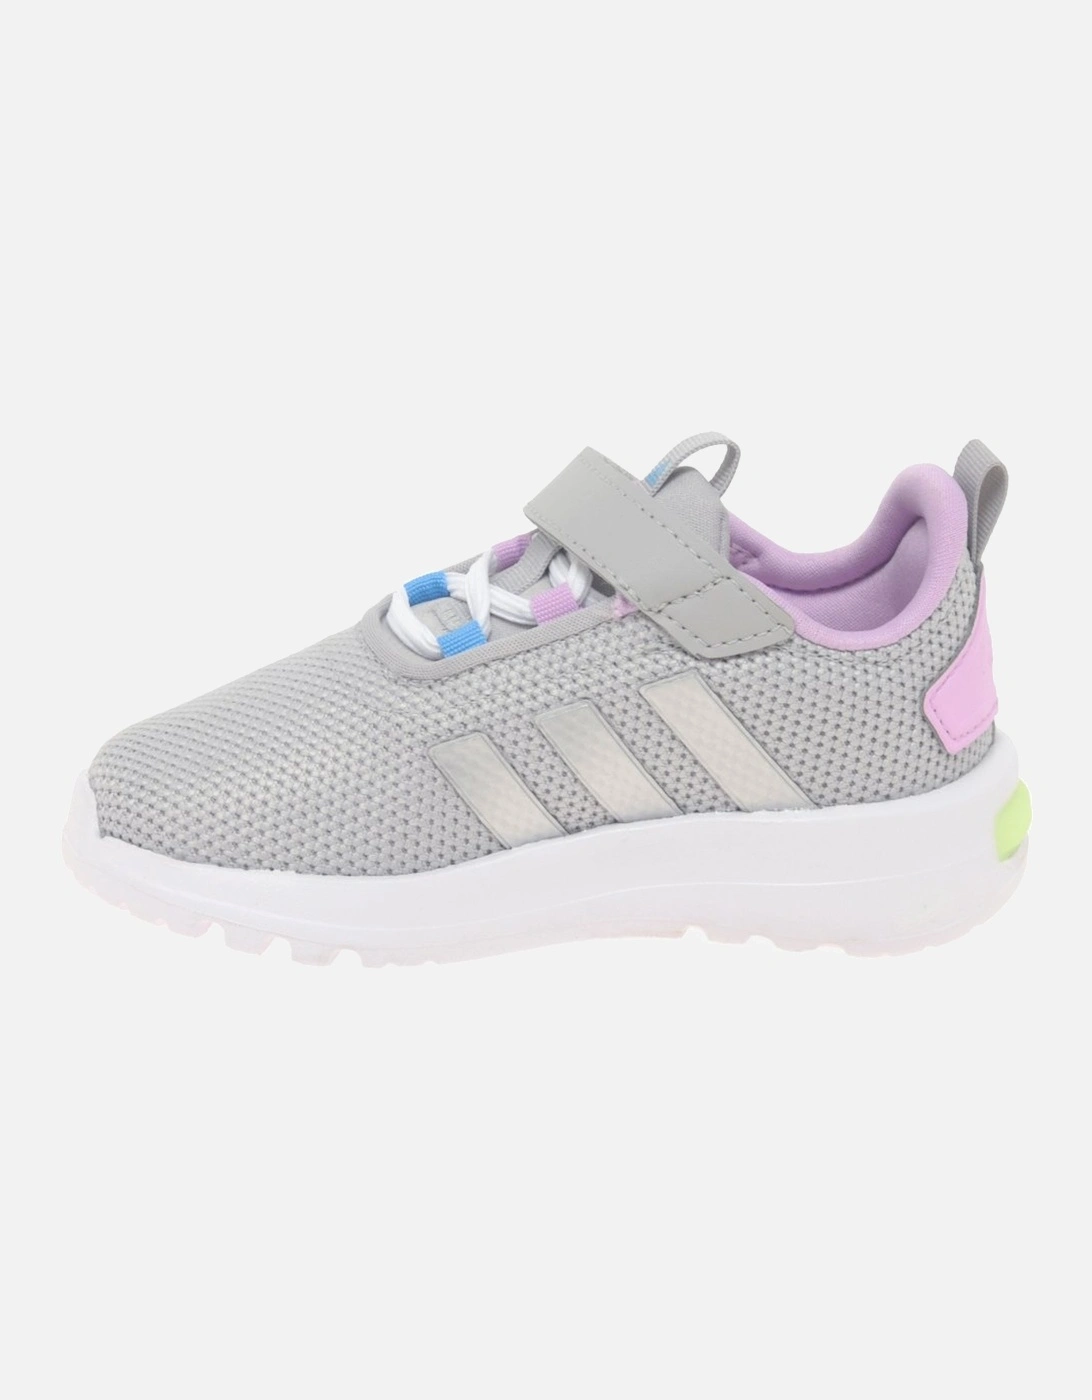 Racer TR23 Kids Infant Trainers